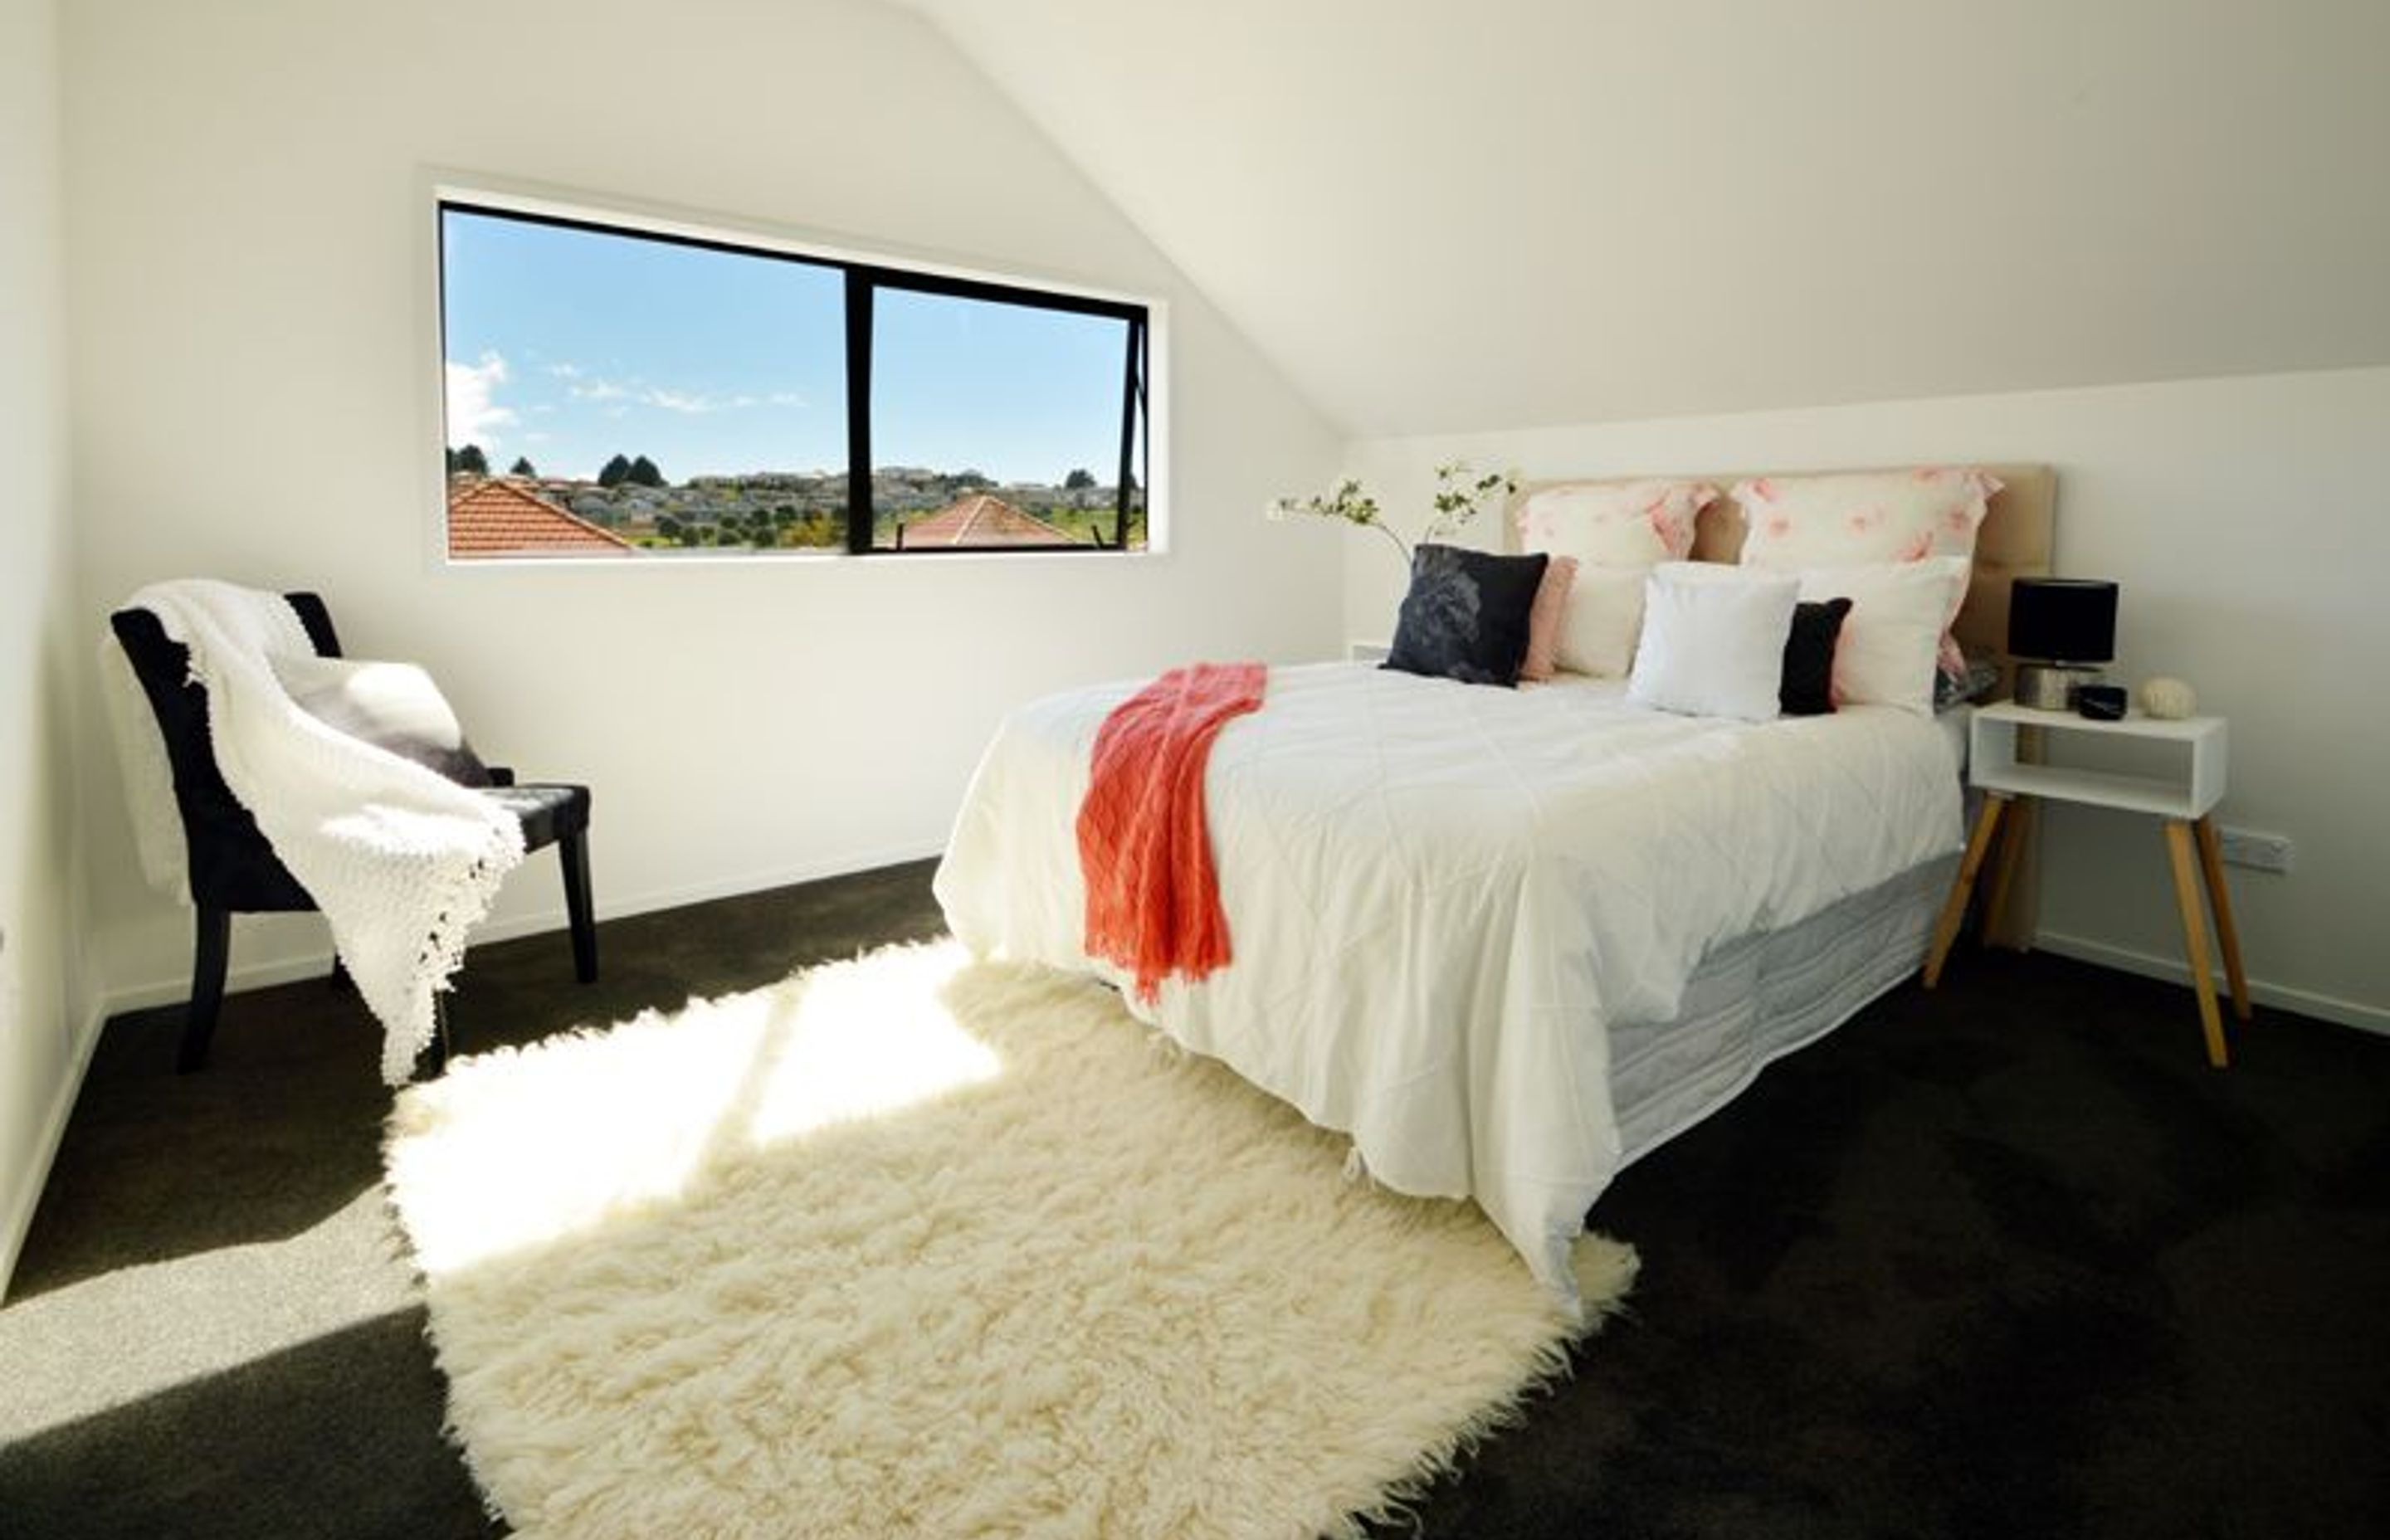 Mini Master - Second master bedroom, complete with walk in wardrobe and shared bathroom and views over Gulf Harbour